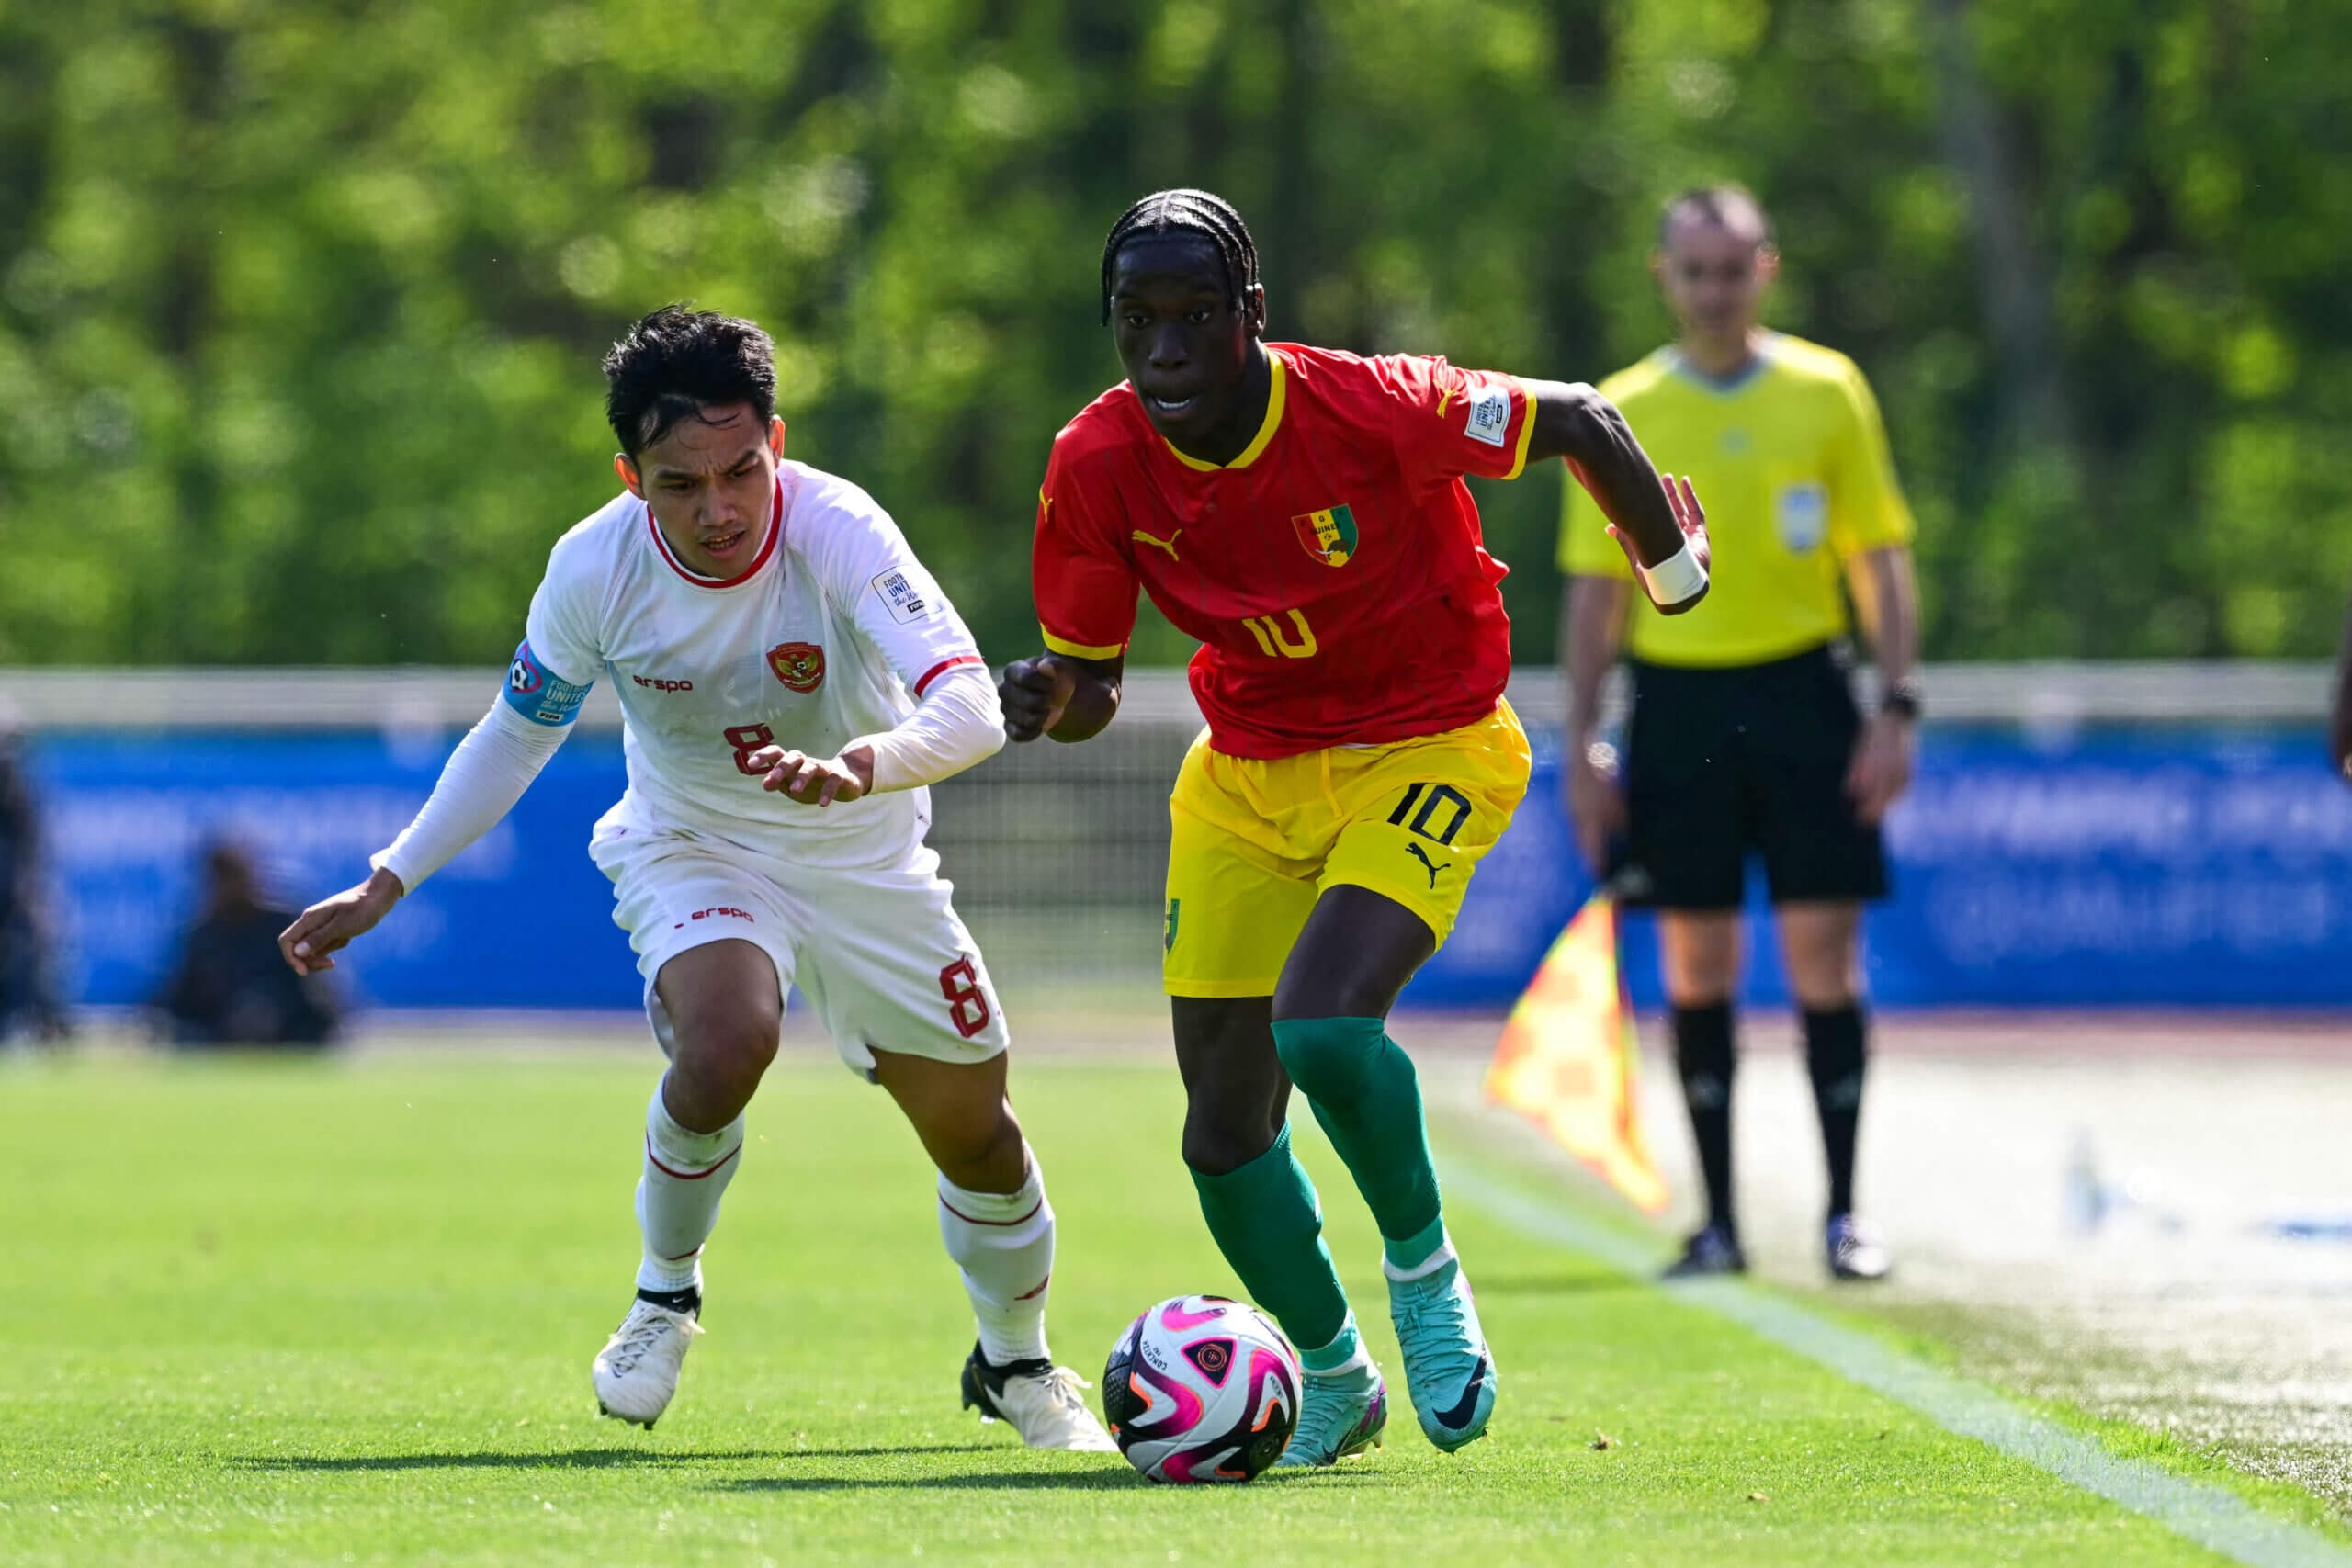 Guinea's Ilaix Moriba scored the only goal of the game to defeat Indonesia (MIGUEL MEDINA/AFP via Getty Images)